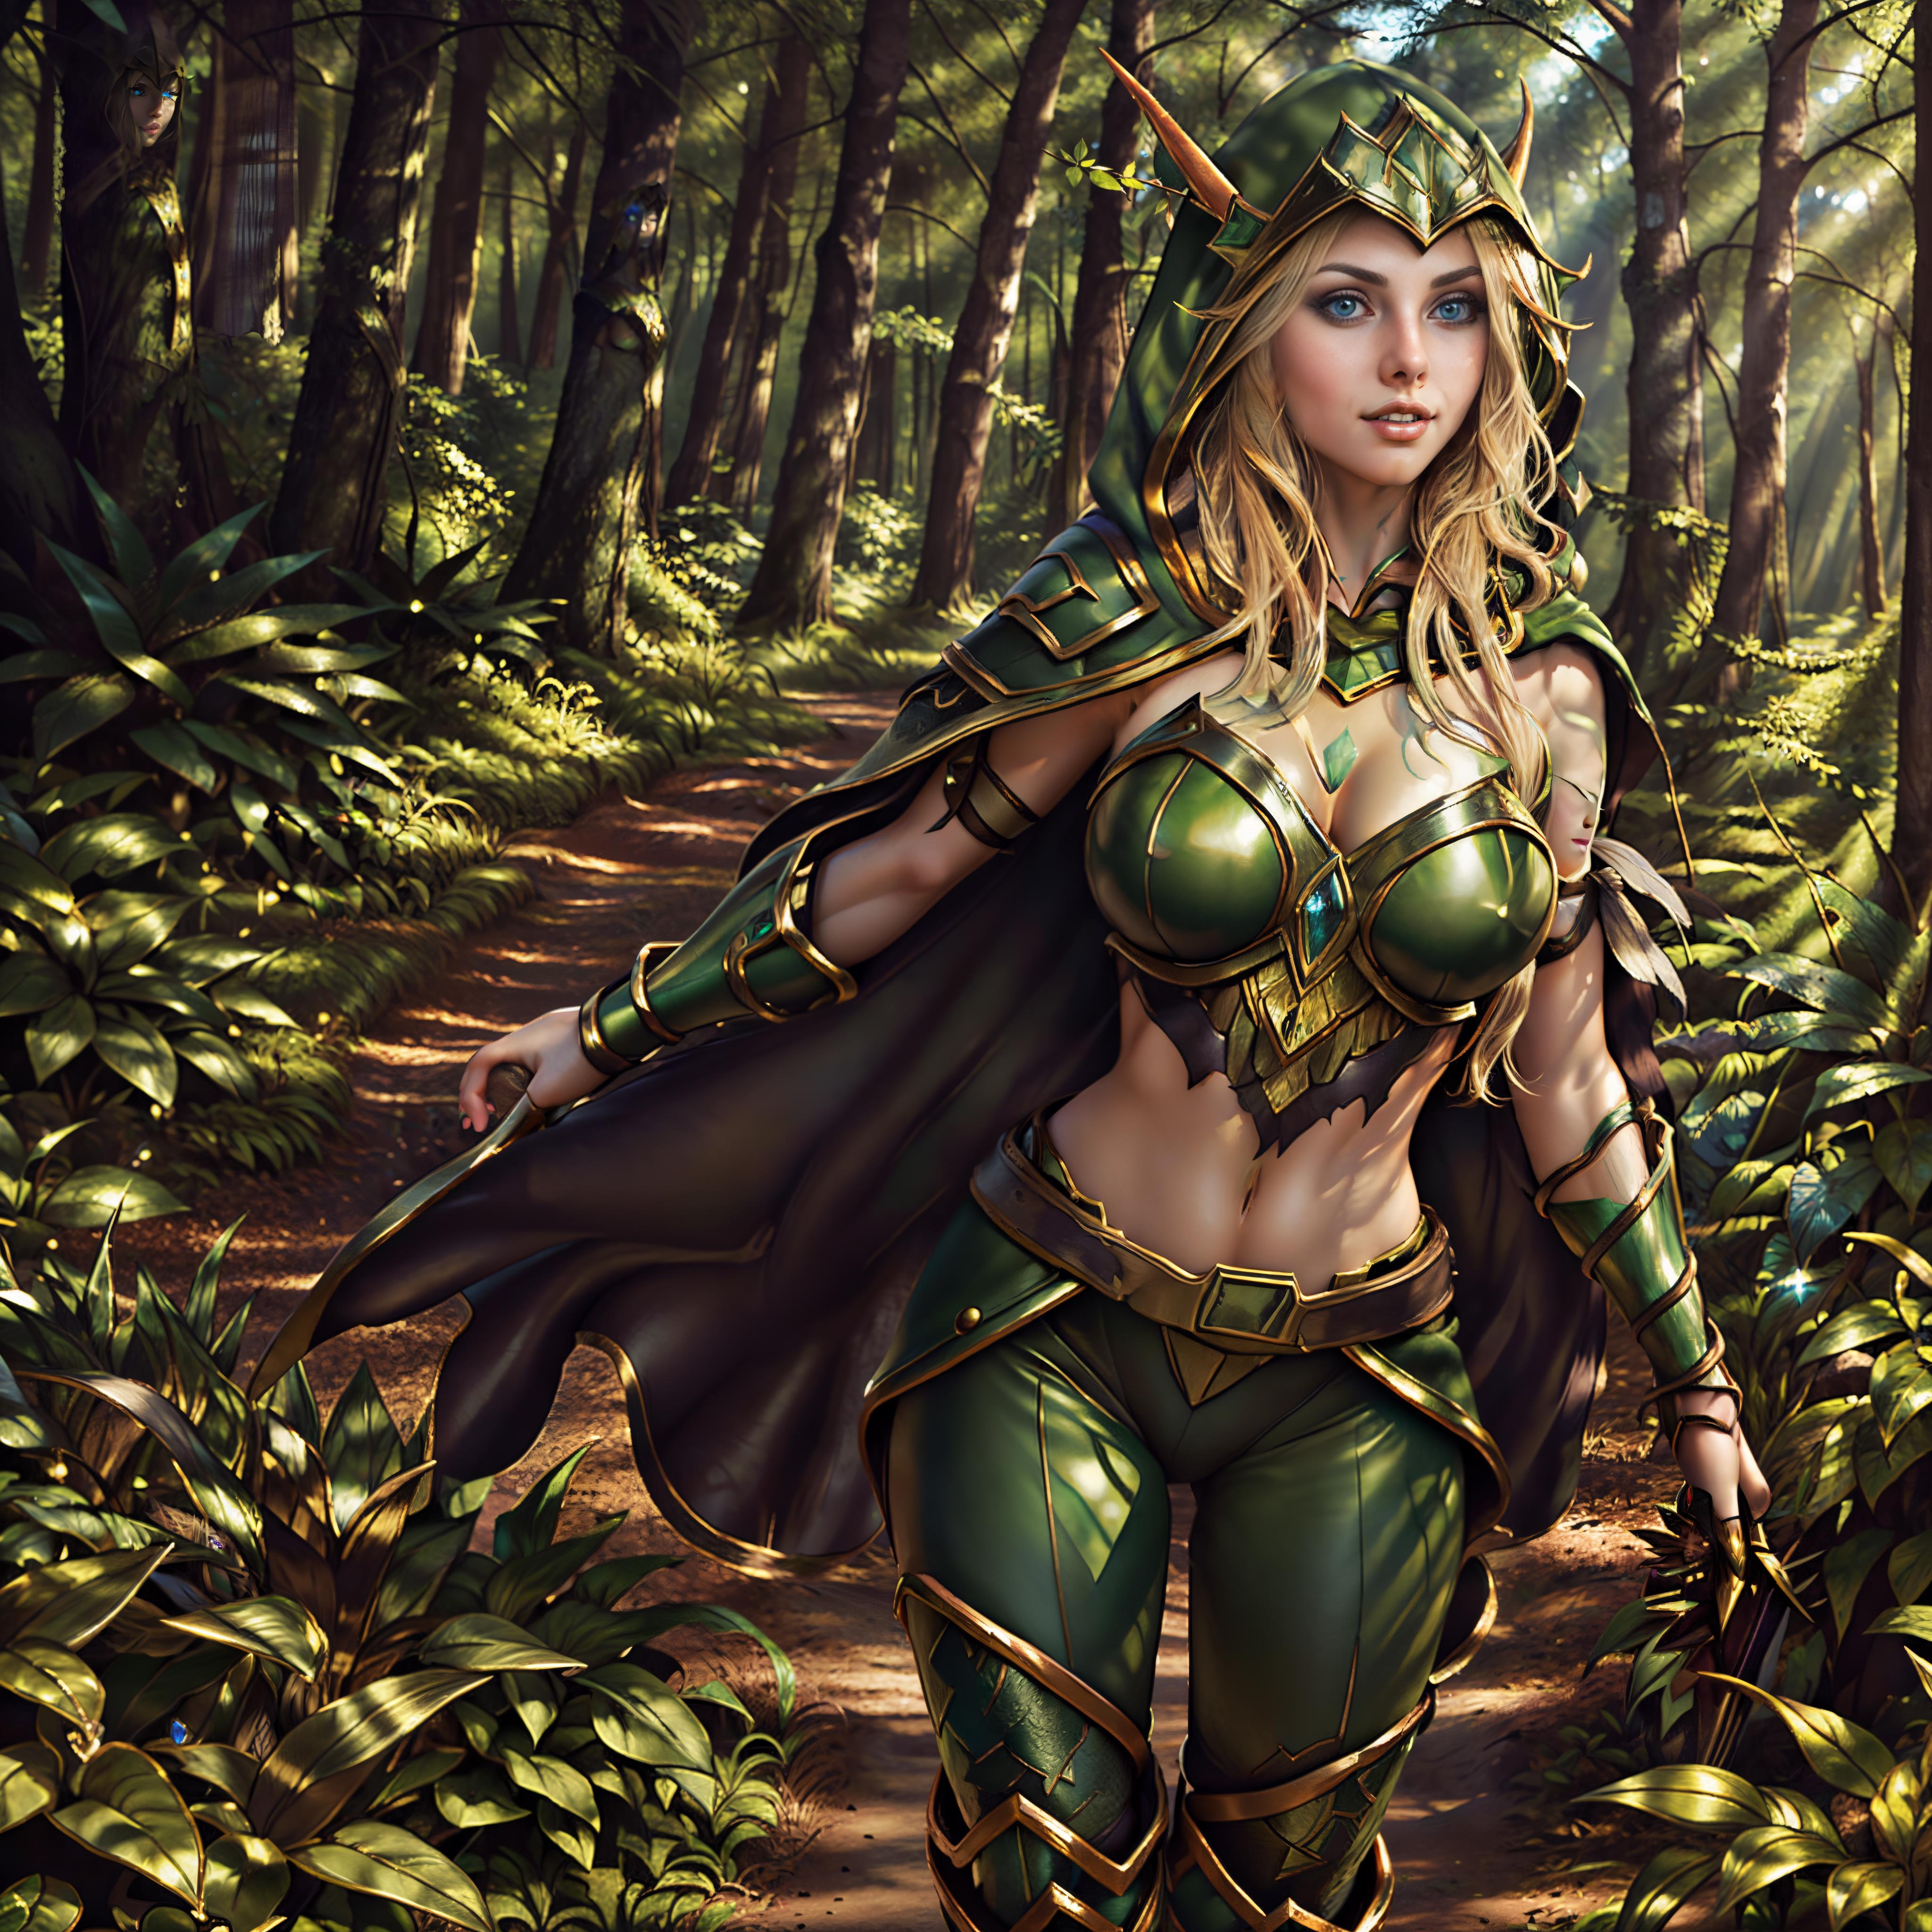 SC_World of Warcraft_Alleria Windrunner image by NeonWizard